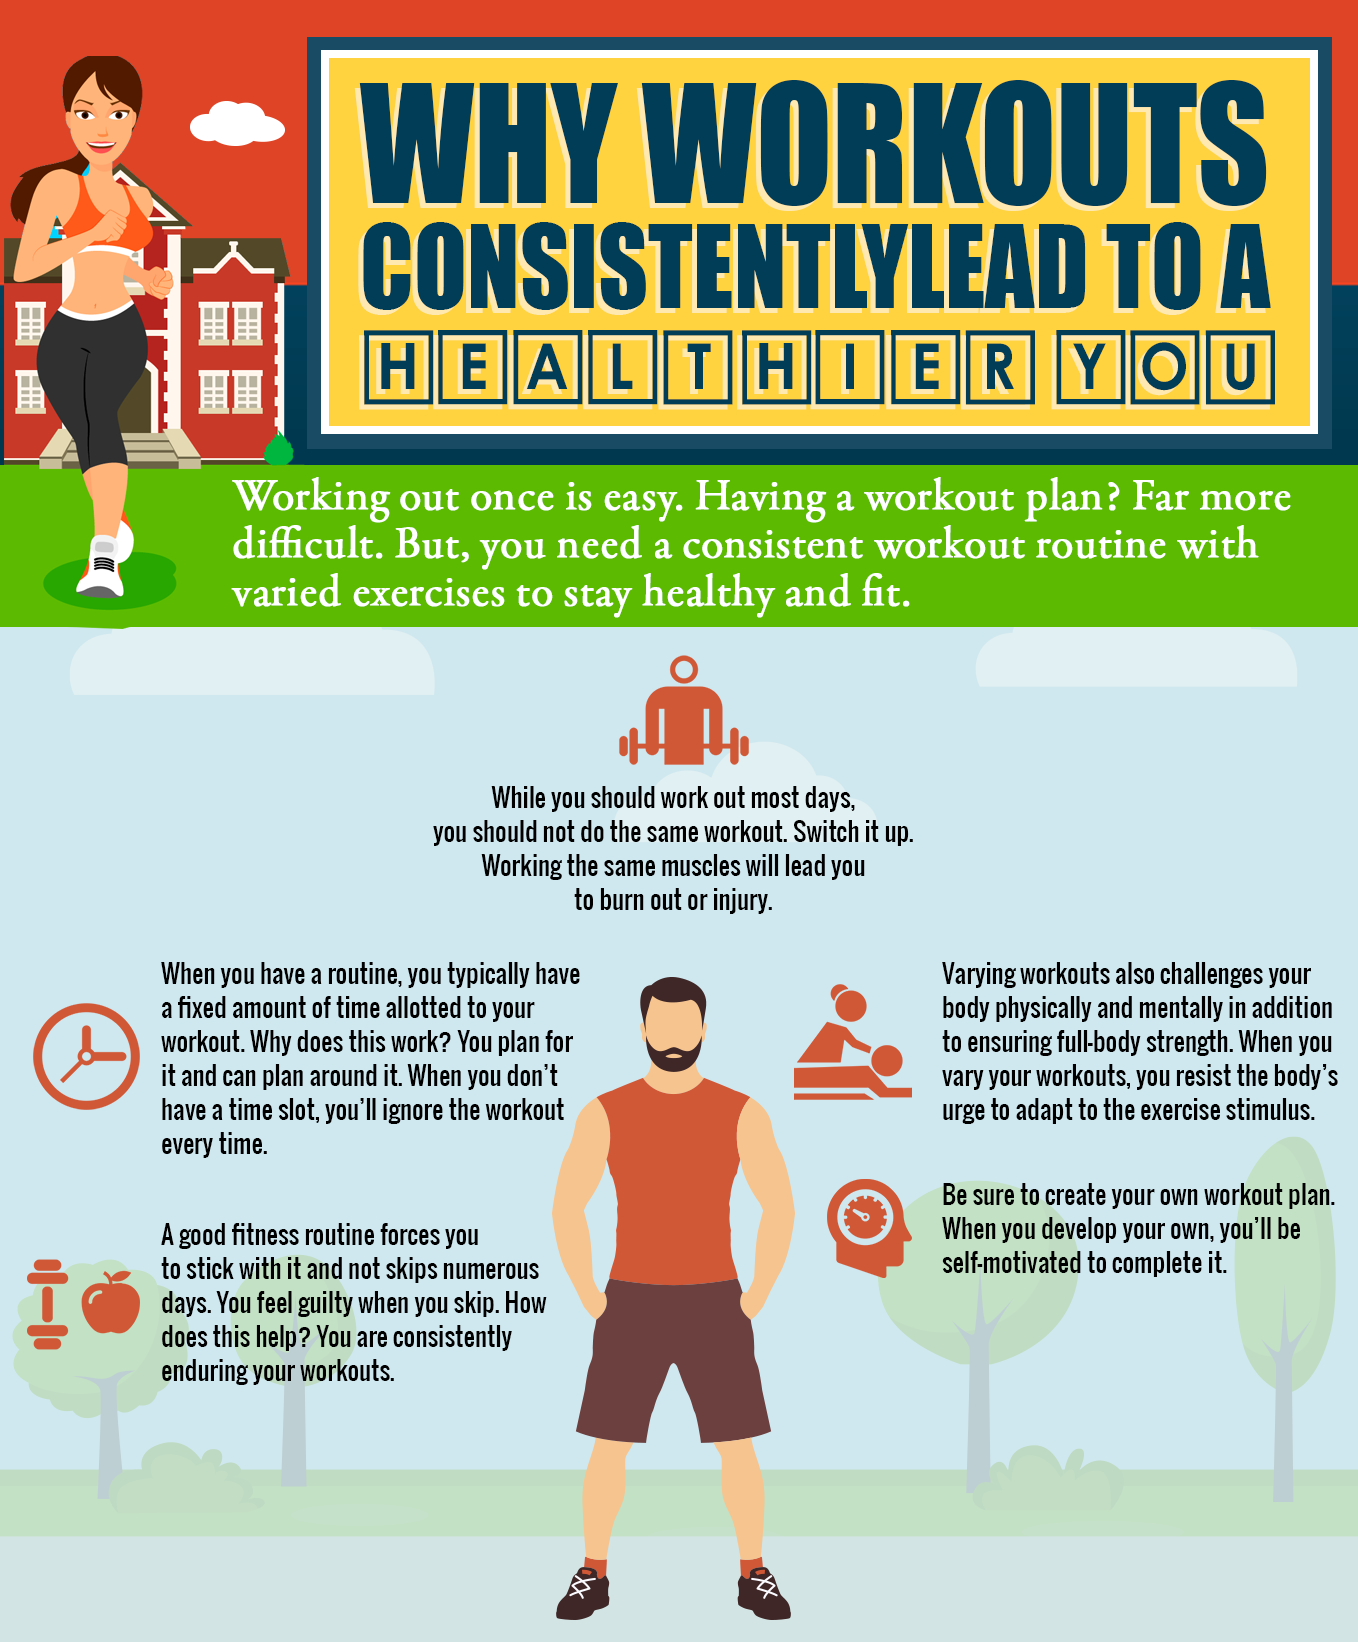 Why Workouts Consistently Lead to a Healthier You